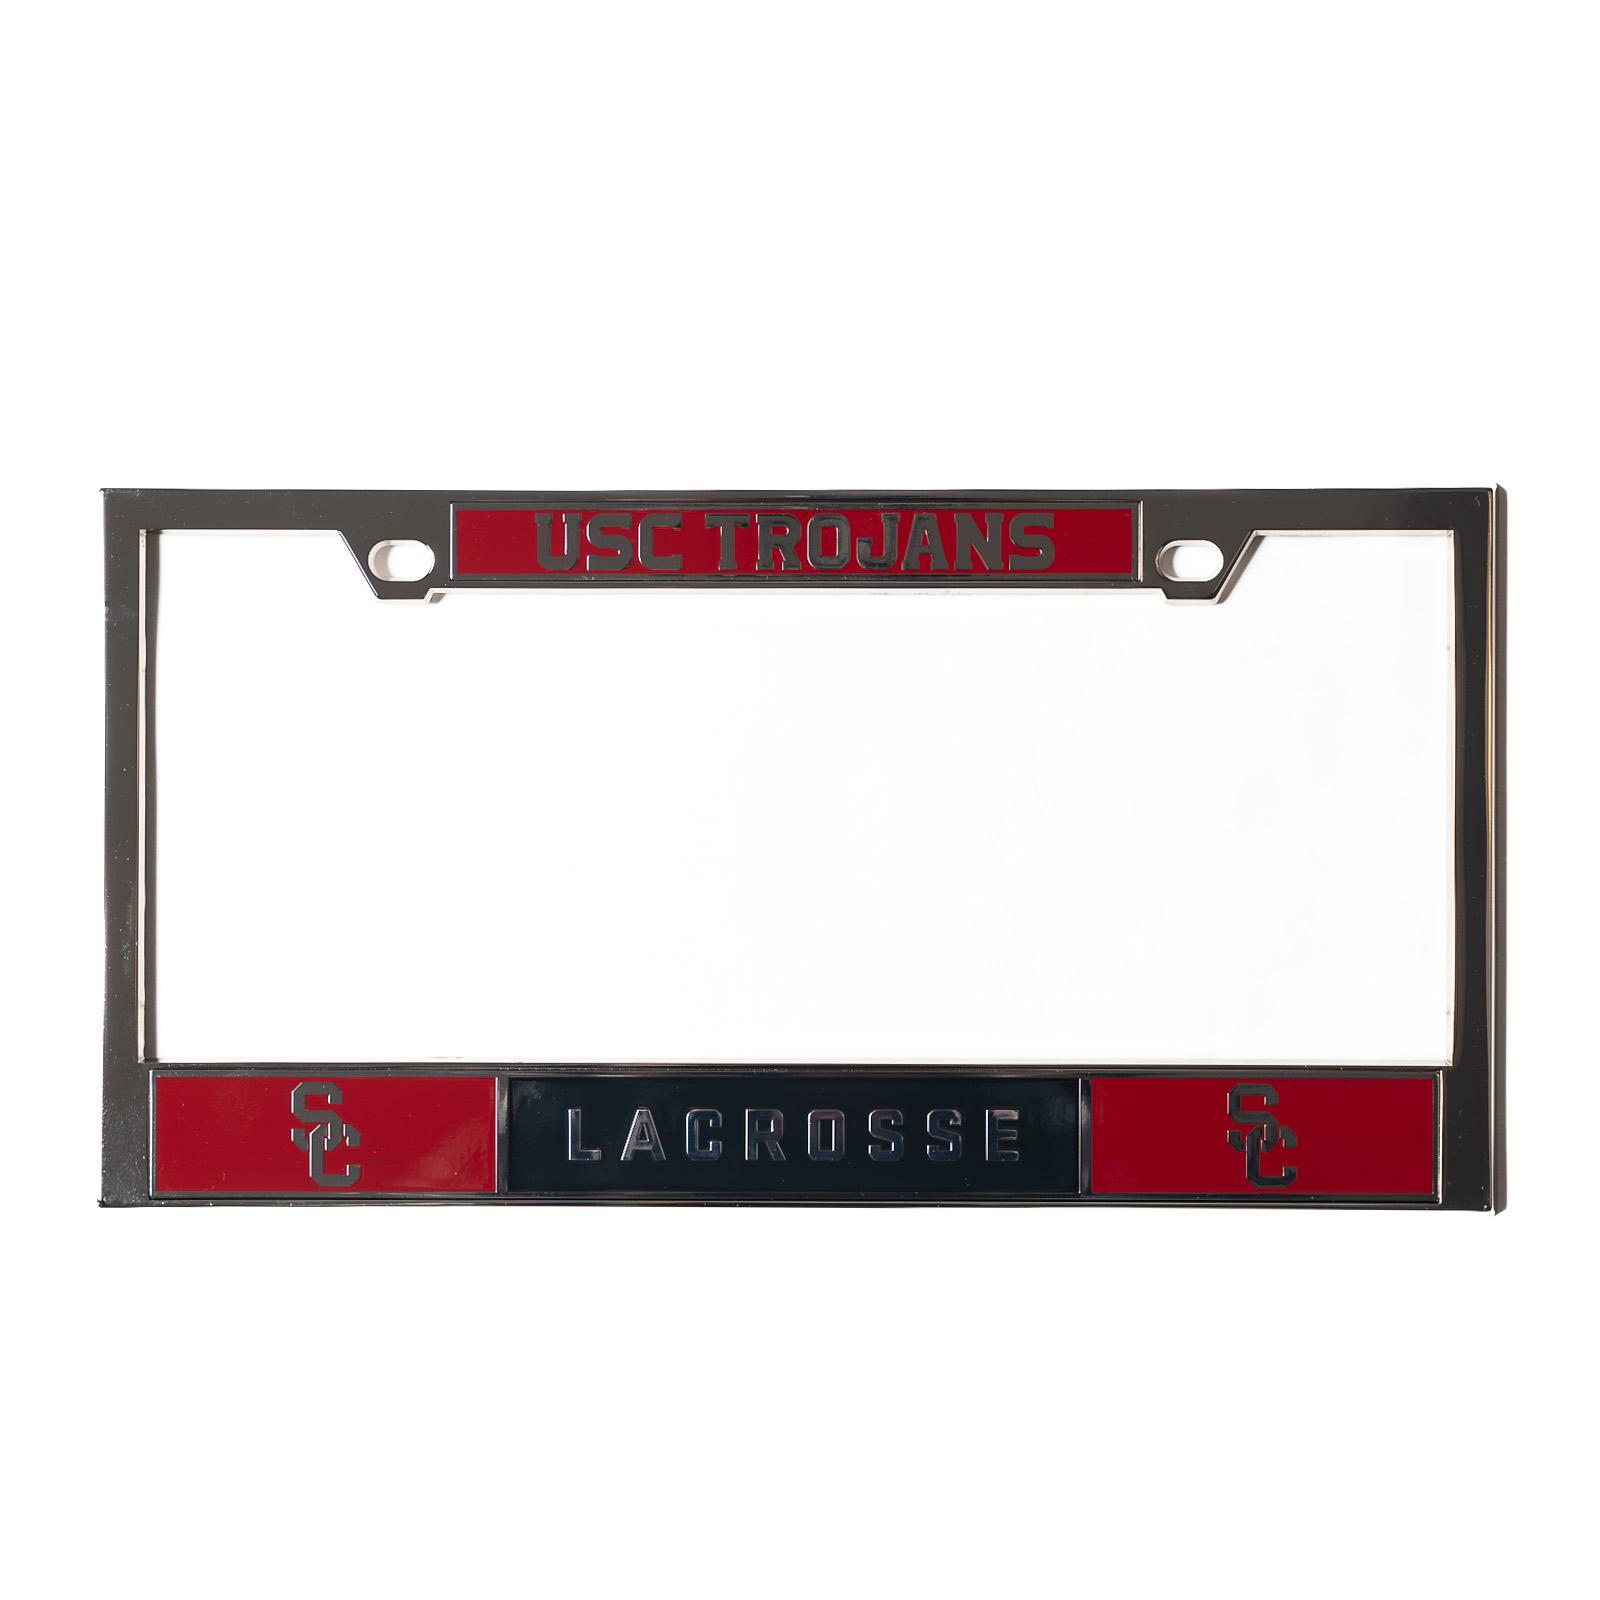 SC Interlock Lacrosse License Plate Frame Chrome by The U Apparel & Gifts image01